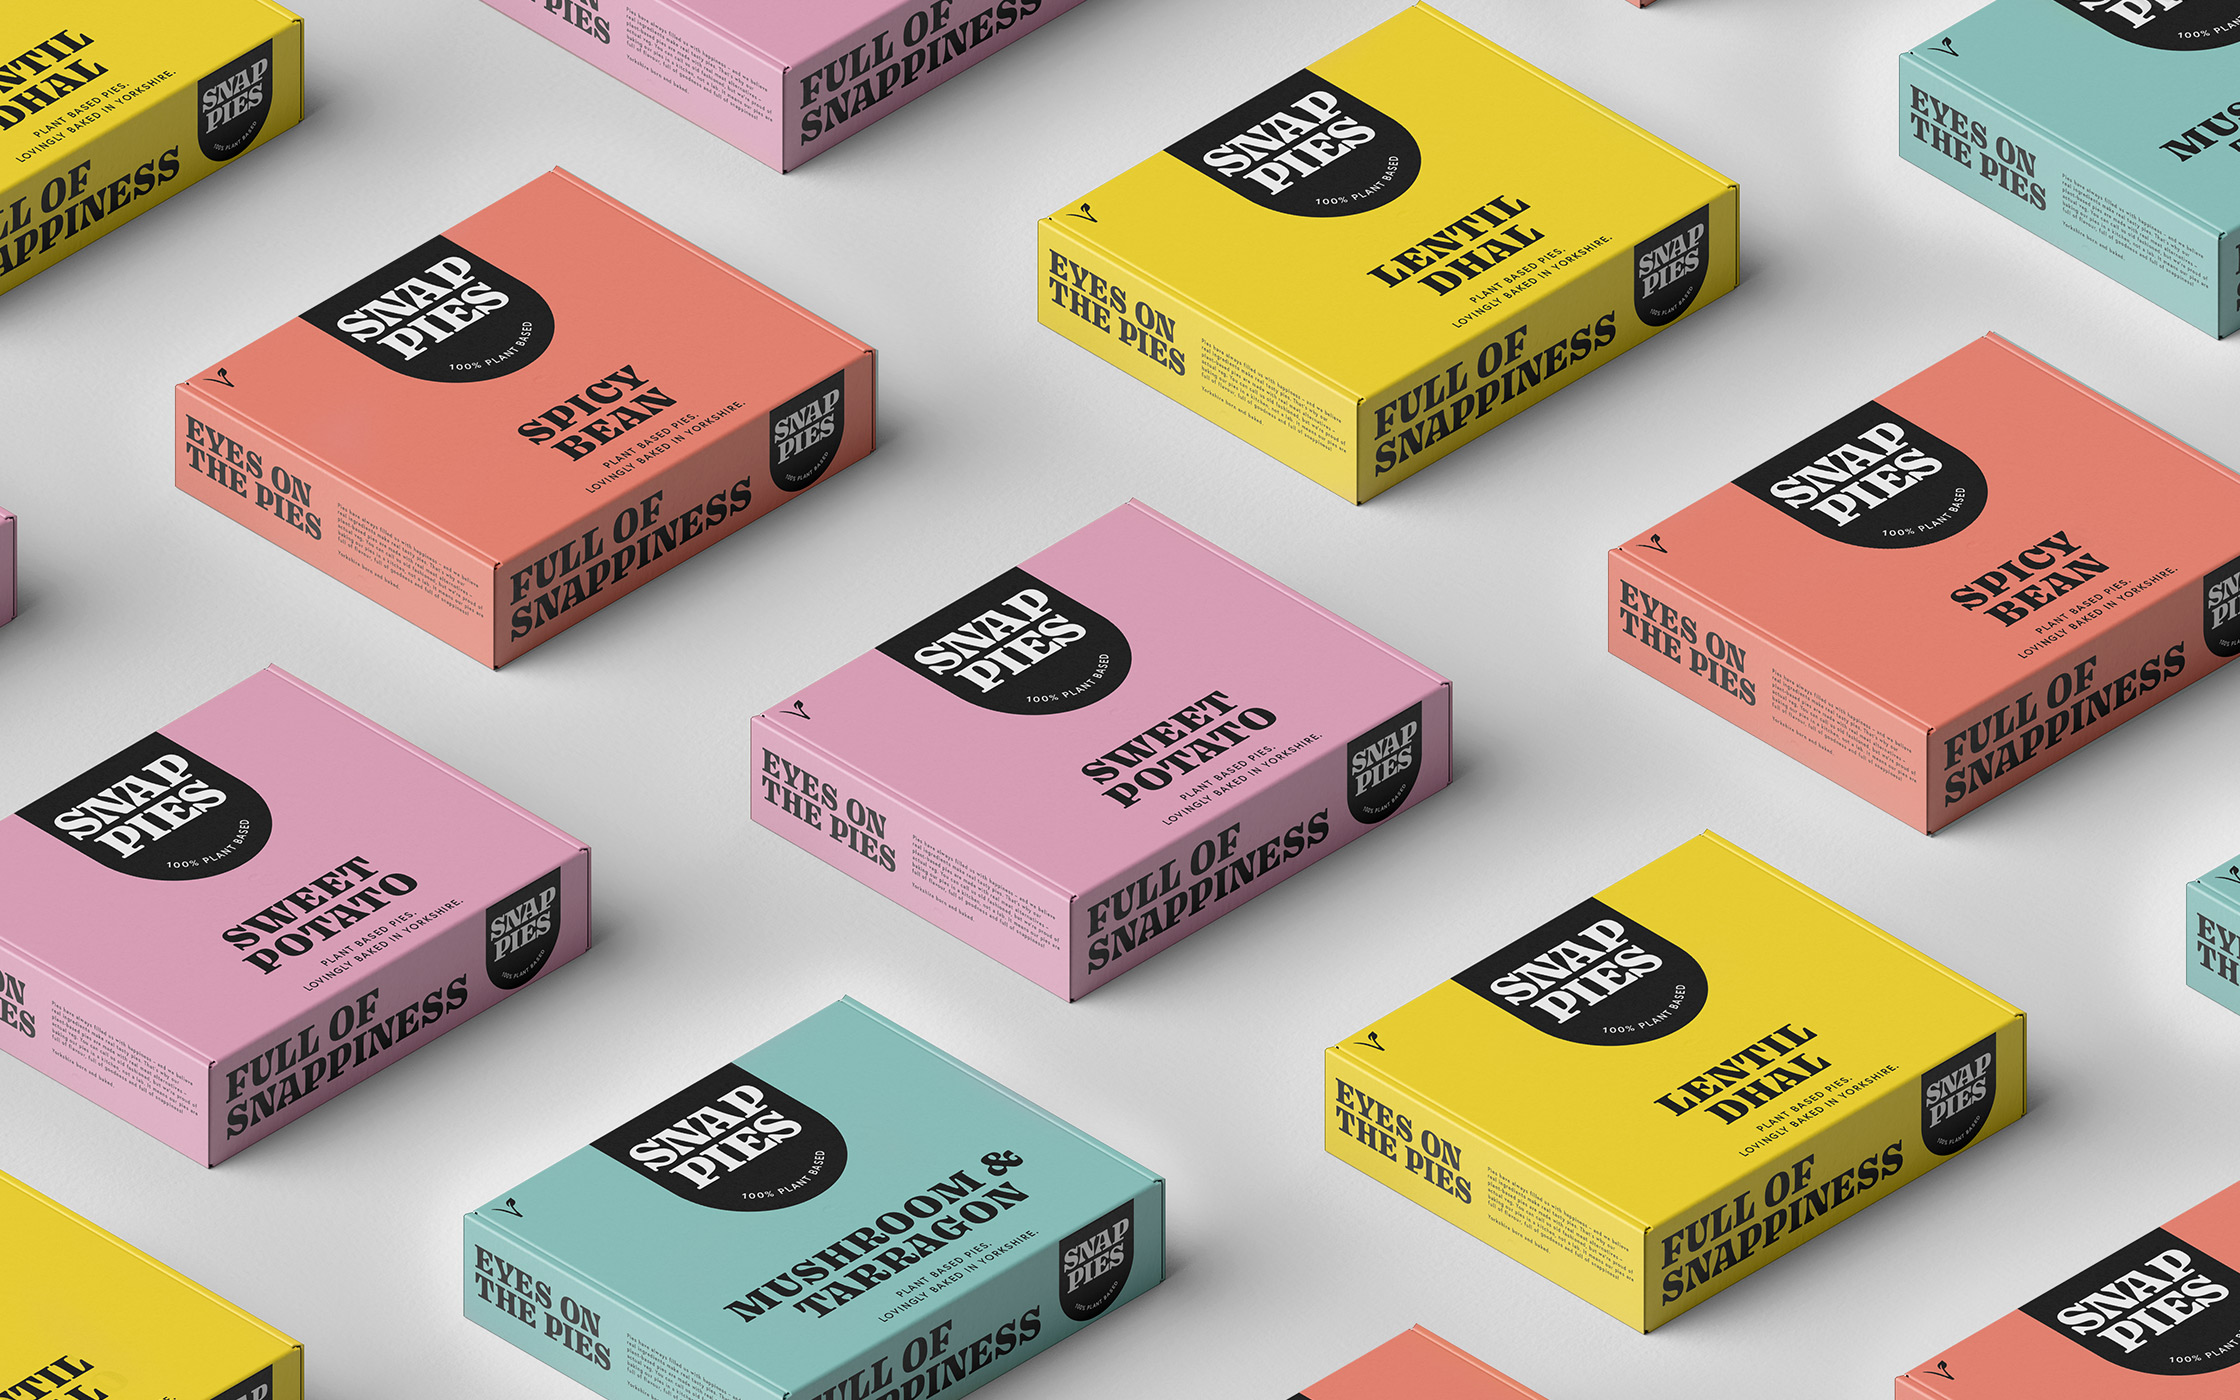 AllGood Branding for Plant-Based Snap Pies, Like a Vegan Working in Butchers